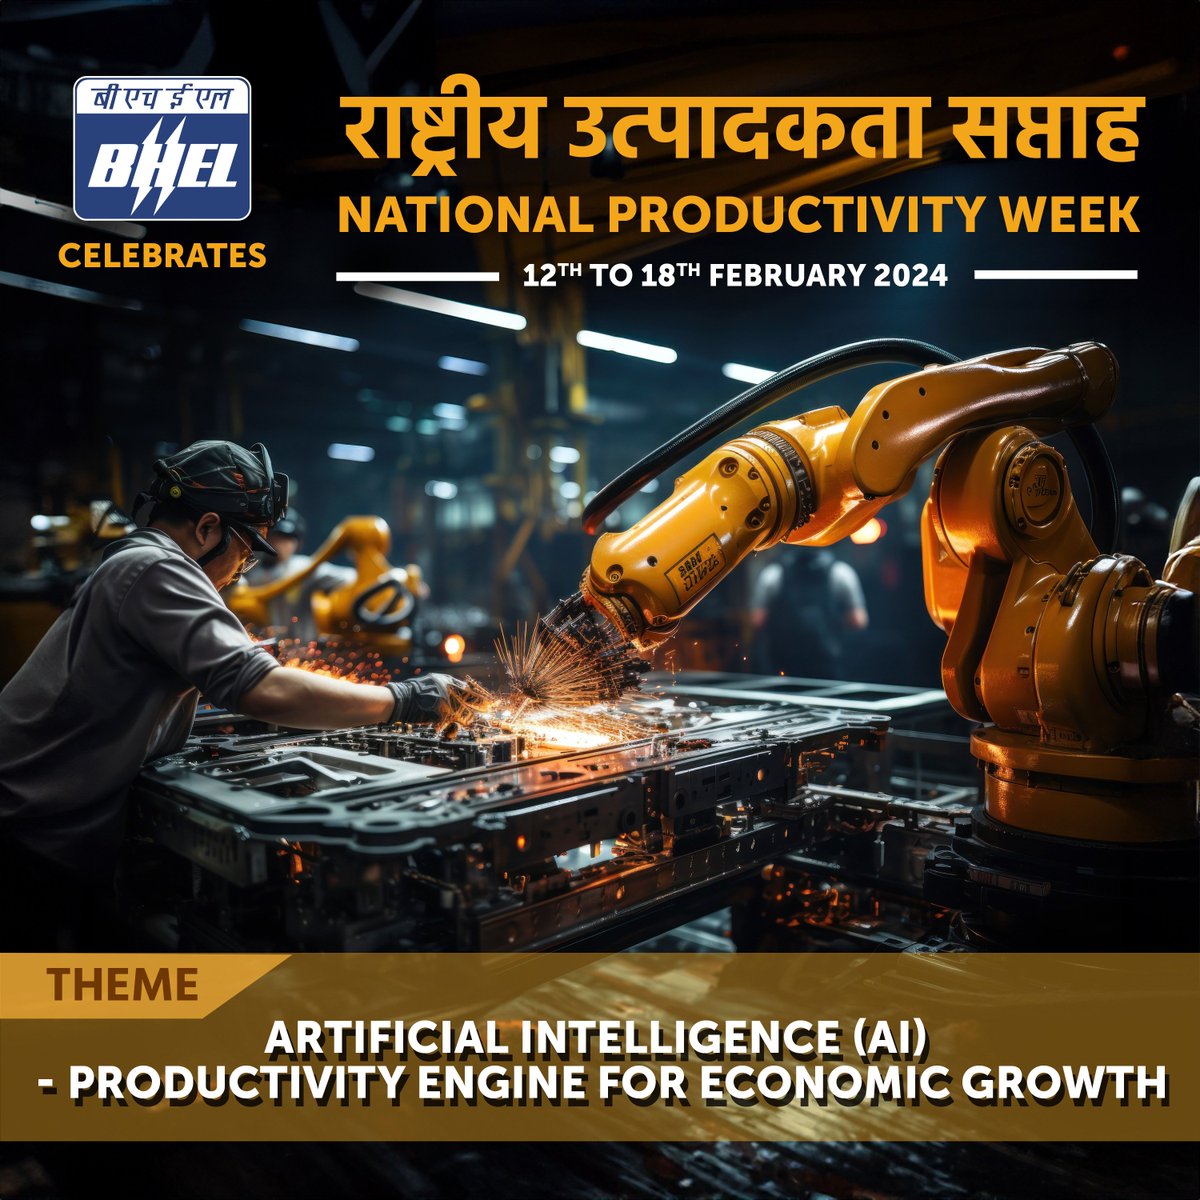 #BHEL is observing 'Productivity Week' from 12th to 18th February, 2024. #nationalproductivityday #selfreliance #nationbuilding #productivity #aatmanirbharbharat #artificialintelligence #productivityweek